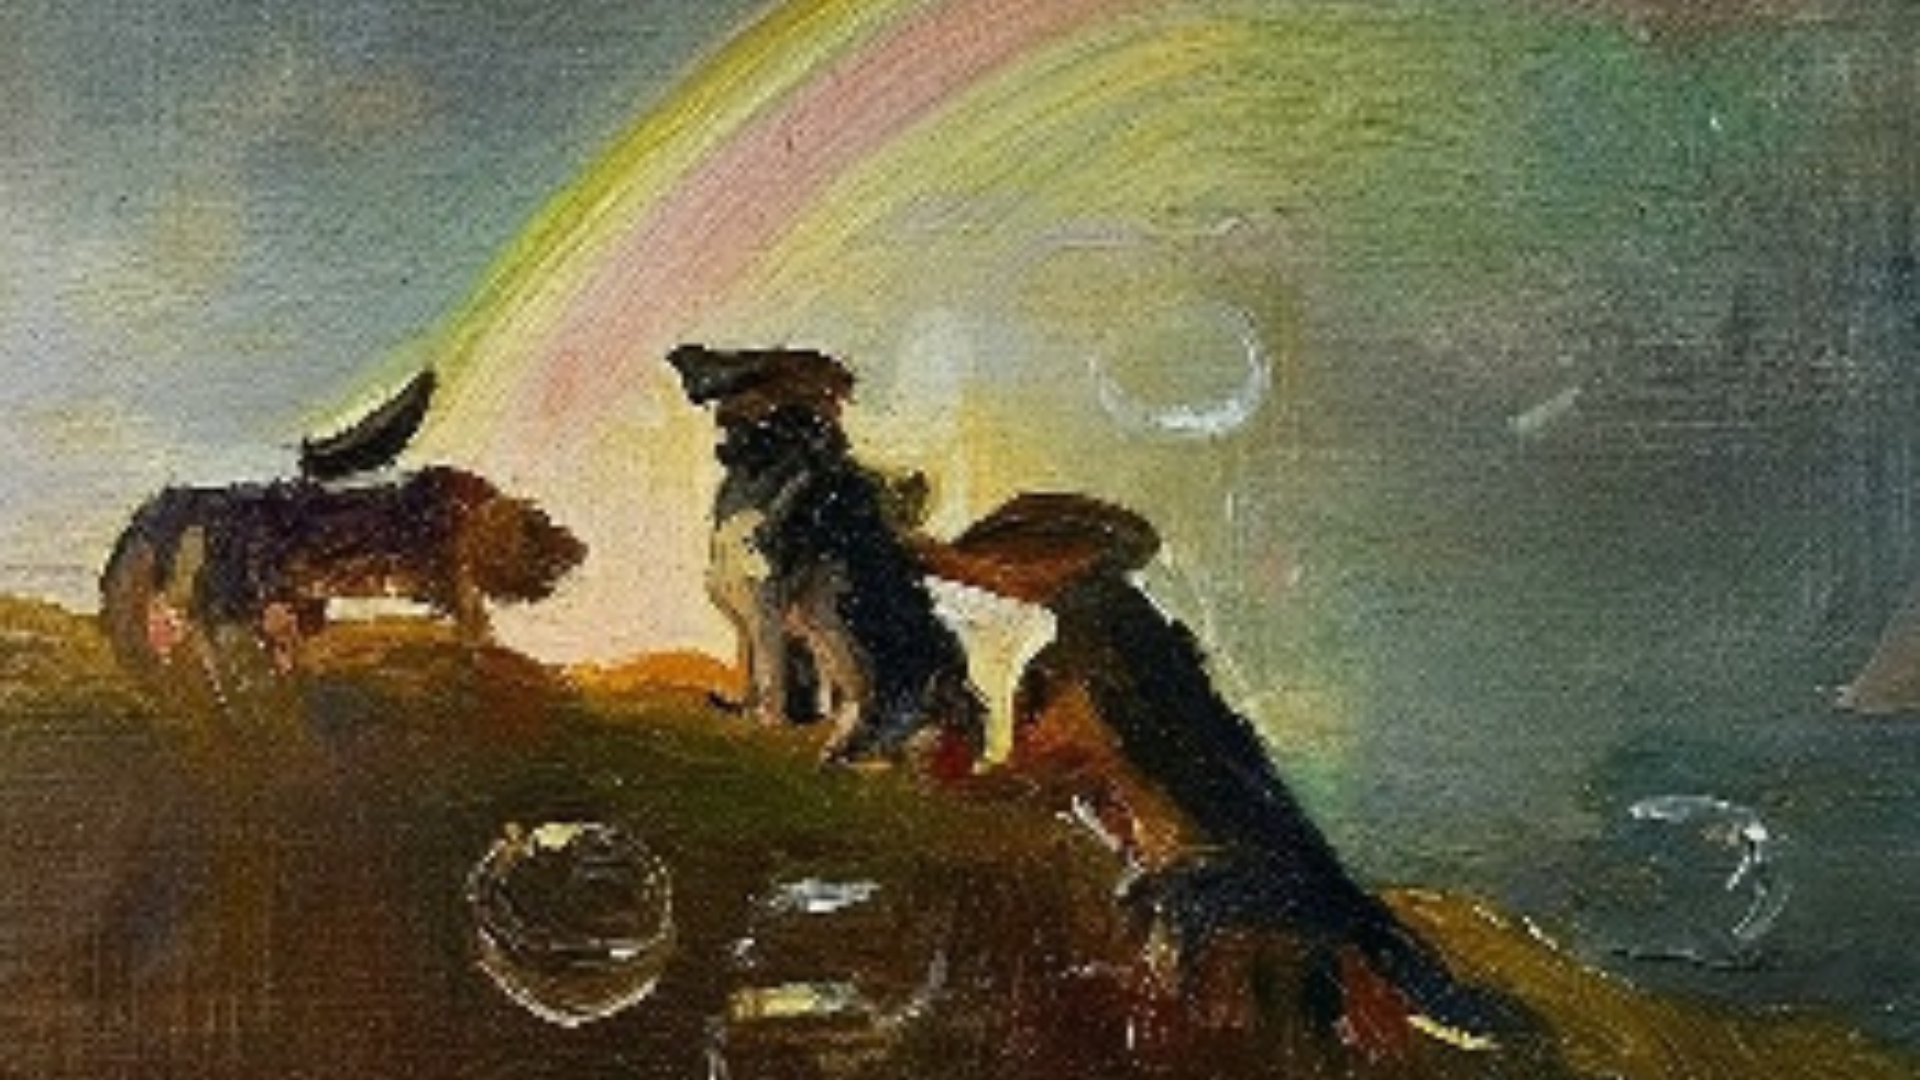 Dogs and soap bubbles under a rainbow in the style of painter Caspar David Friedrich.